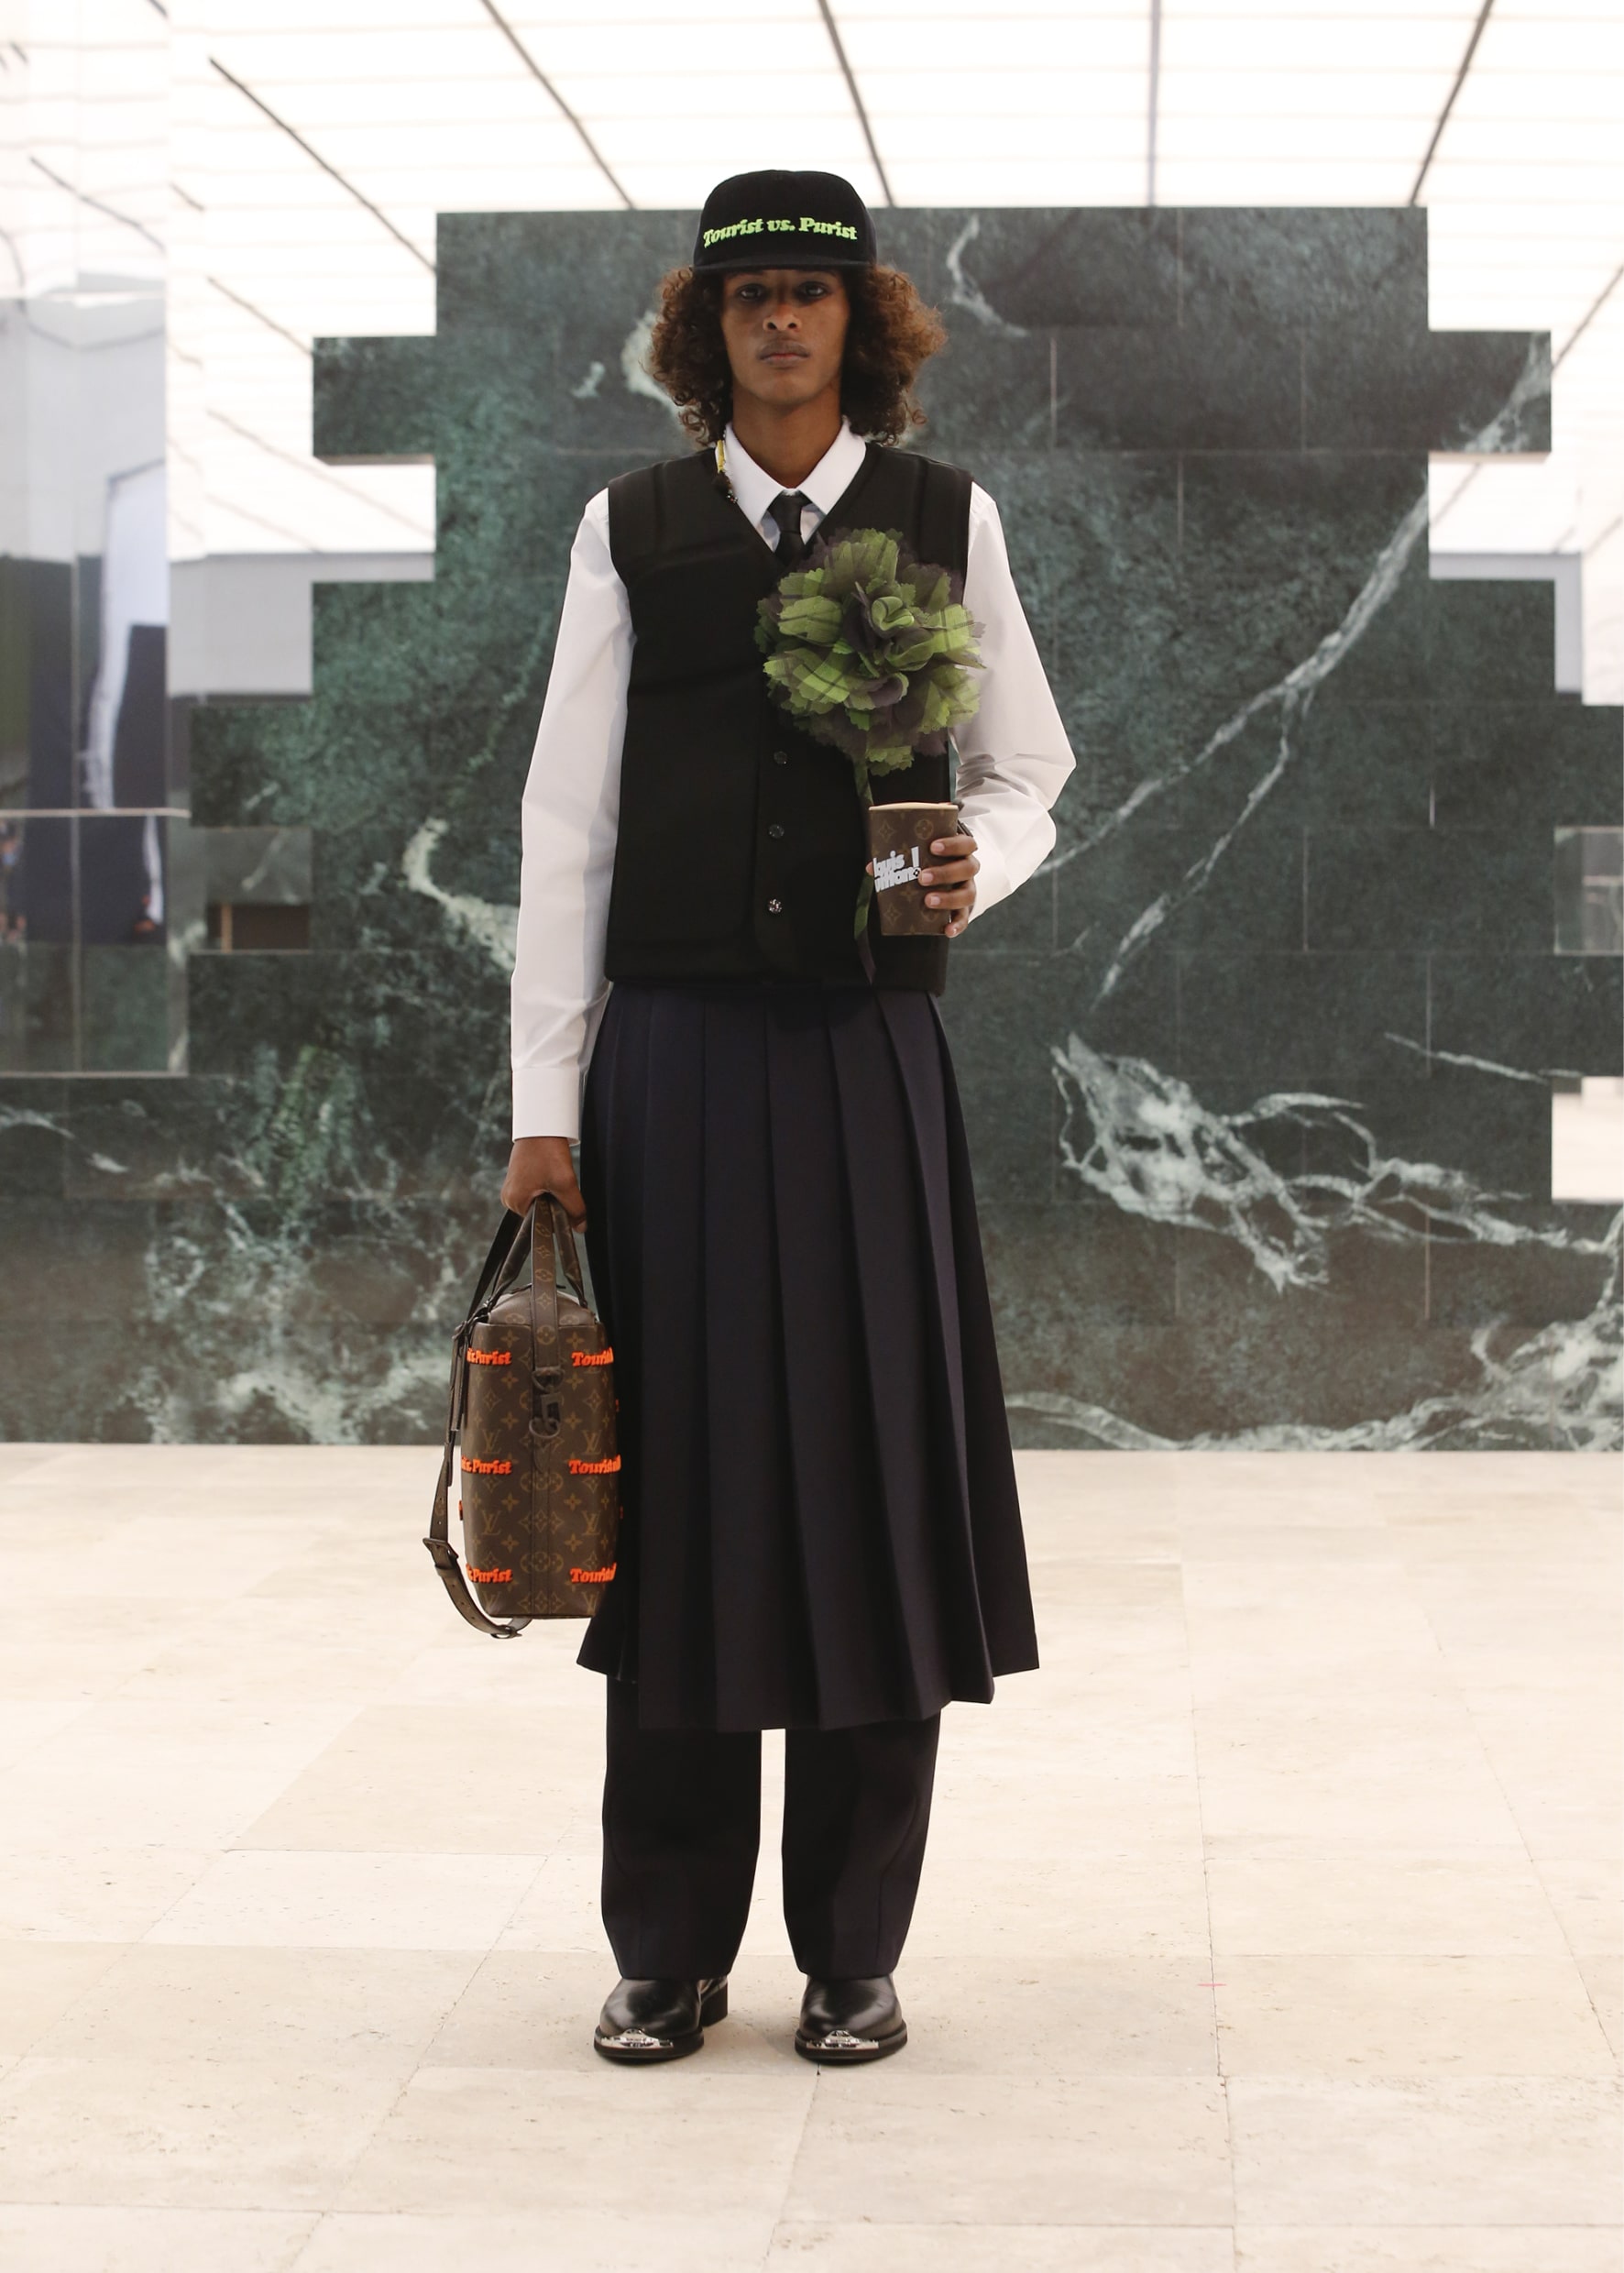 fashion month  standouts from the aw21 season – Schön! Magazine